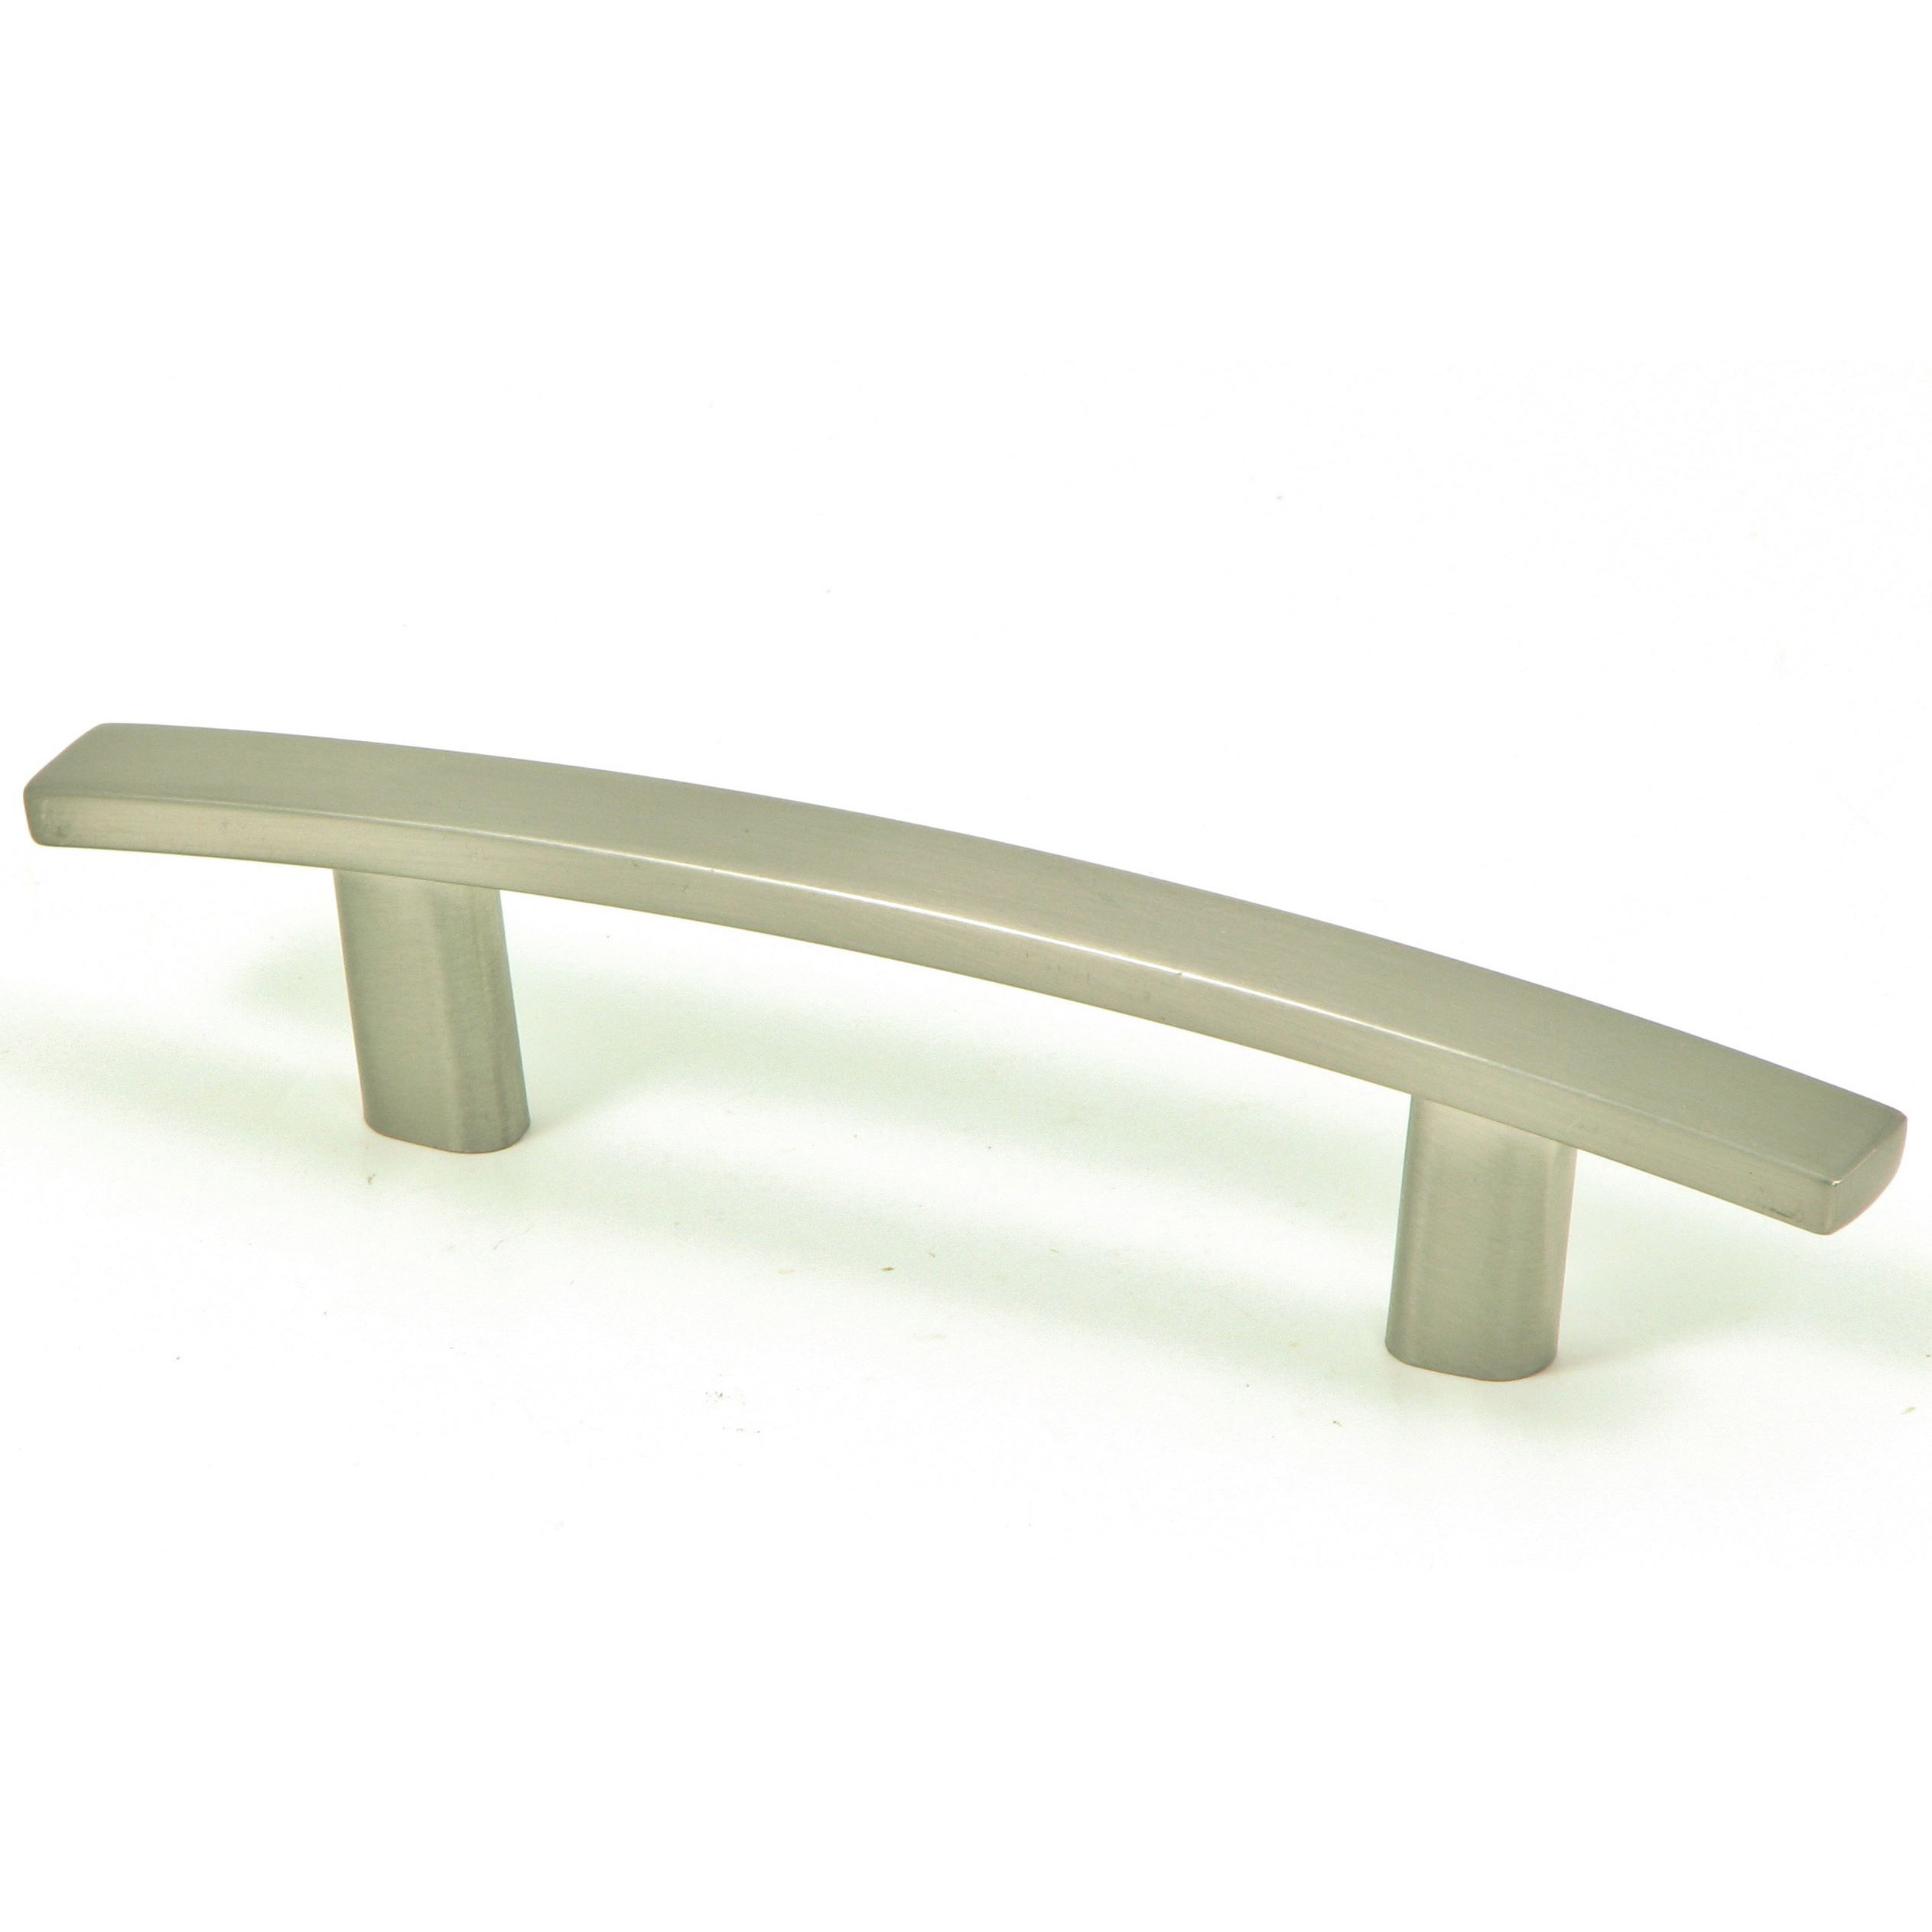 Metro Arch 5-1/4" Cabinet Pull in Satin Nickel